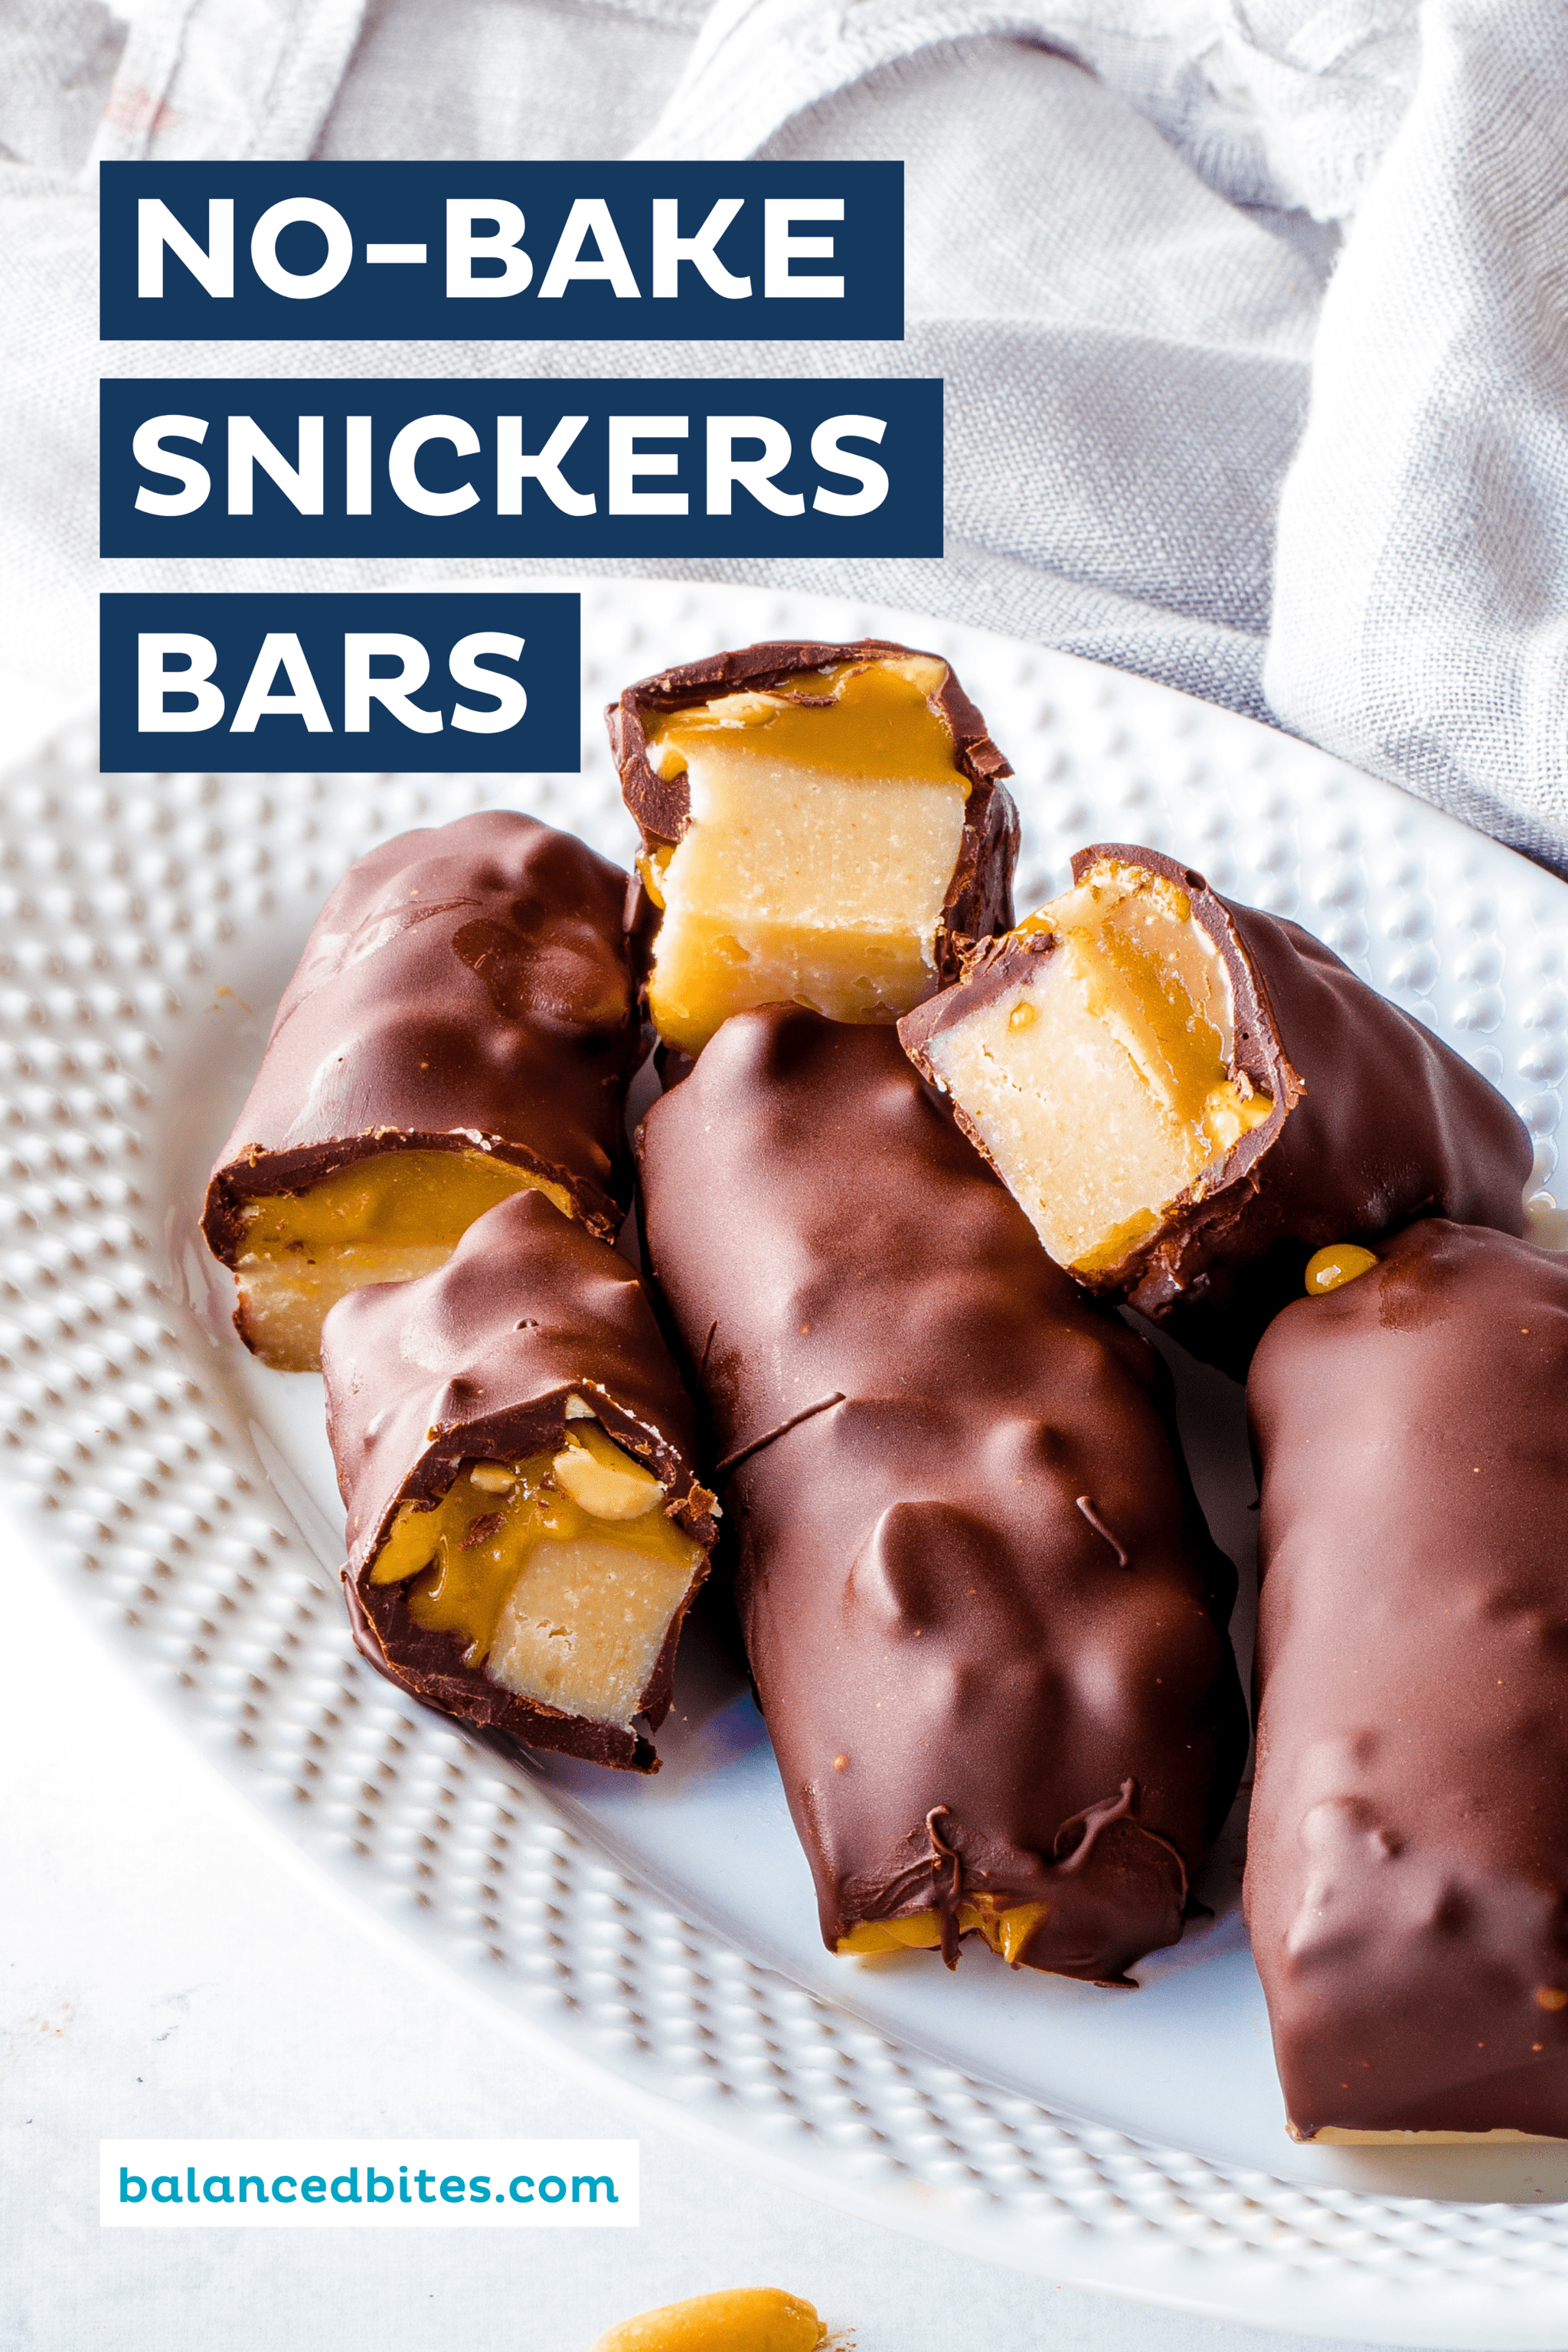 No-Bake Snickers Bars from The Ultimate Keto Cookbook by Brittany Angell | Balanced Bites | Diane Sanfilippo